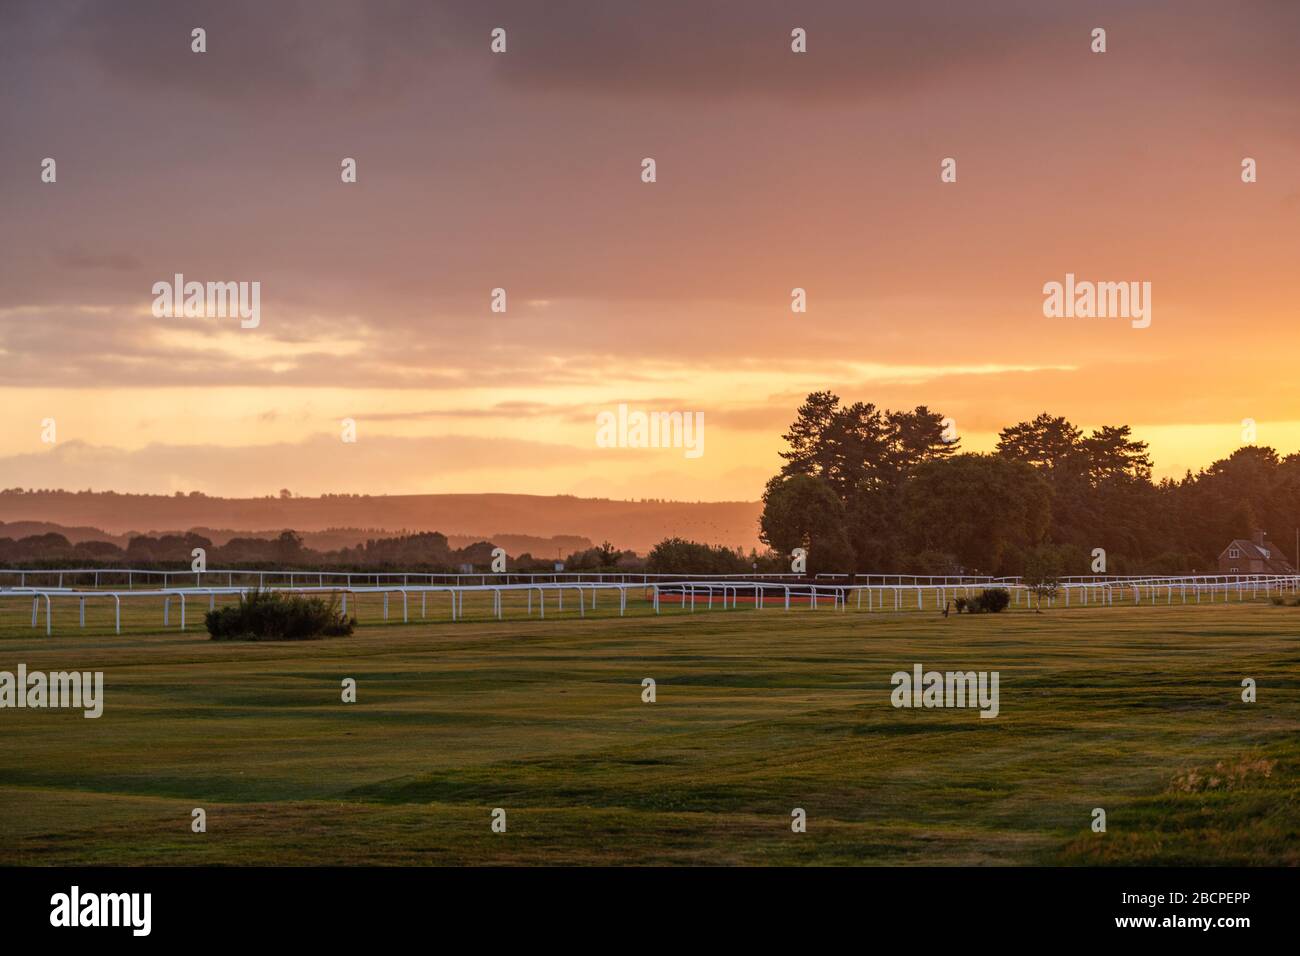 Stormy sunset sky over horse race track in United Kingdom Stock Photo